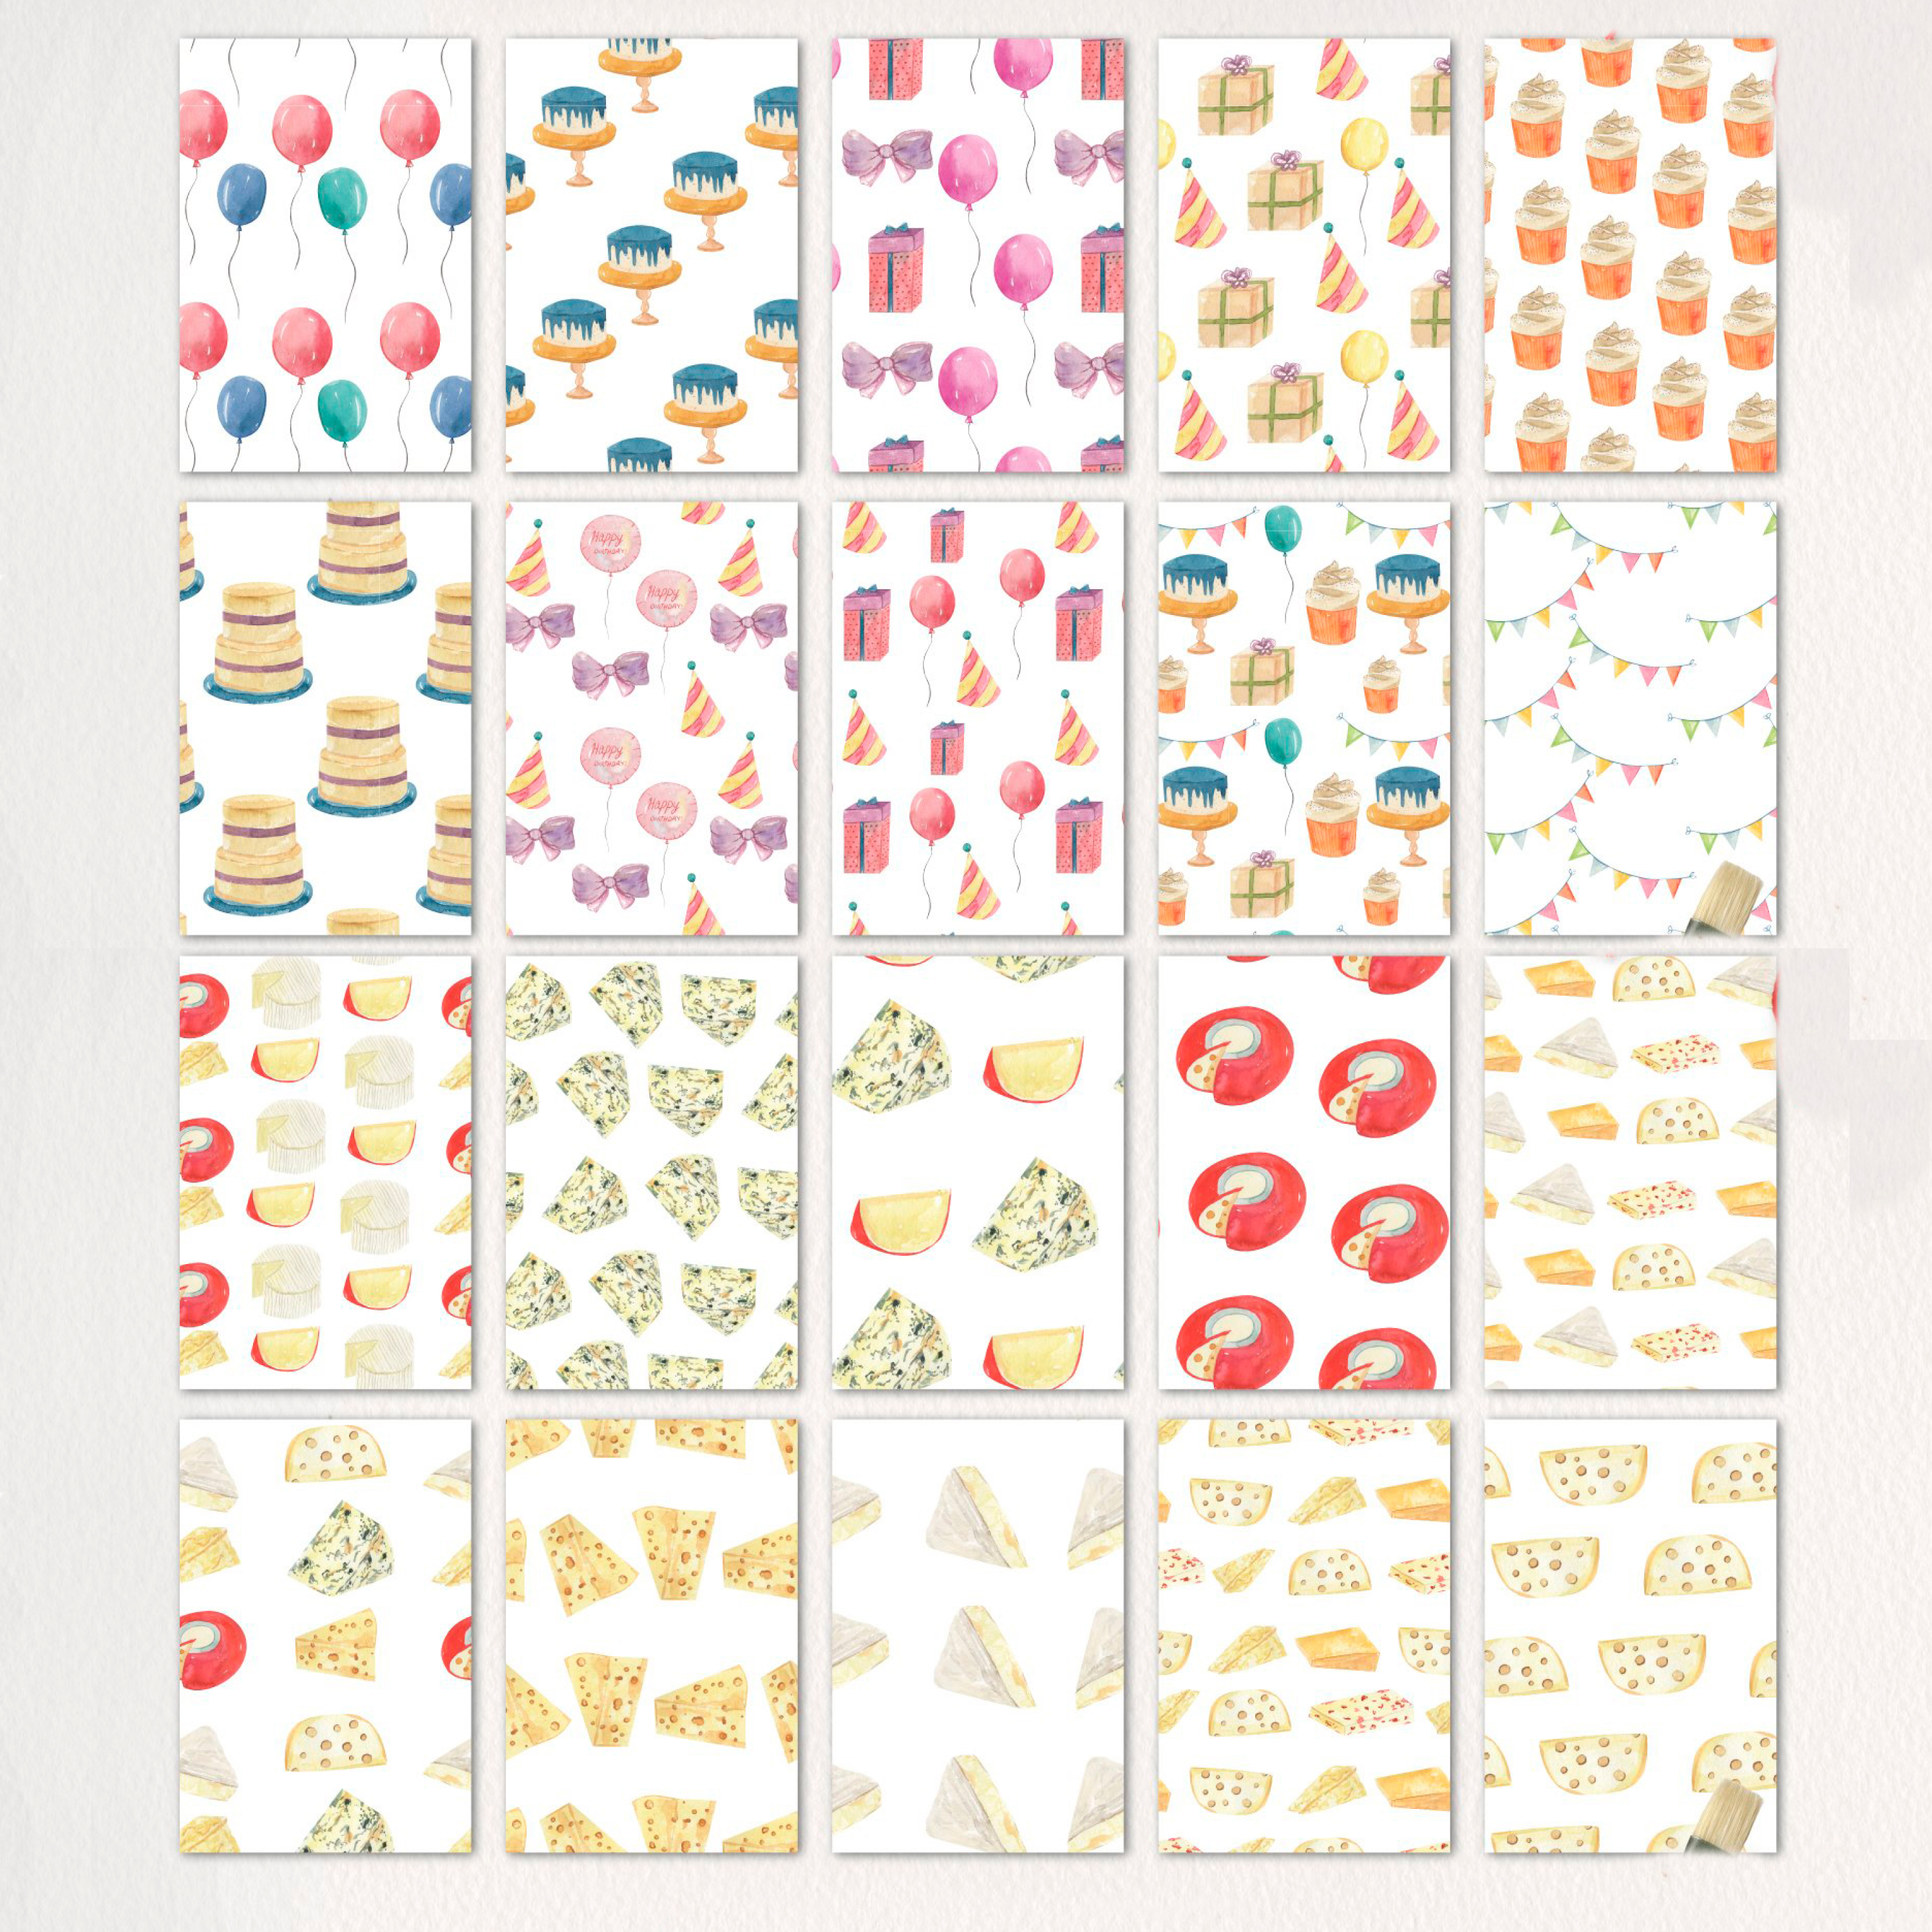 Set of colorful images of hard cheese and gift boxes.